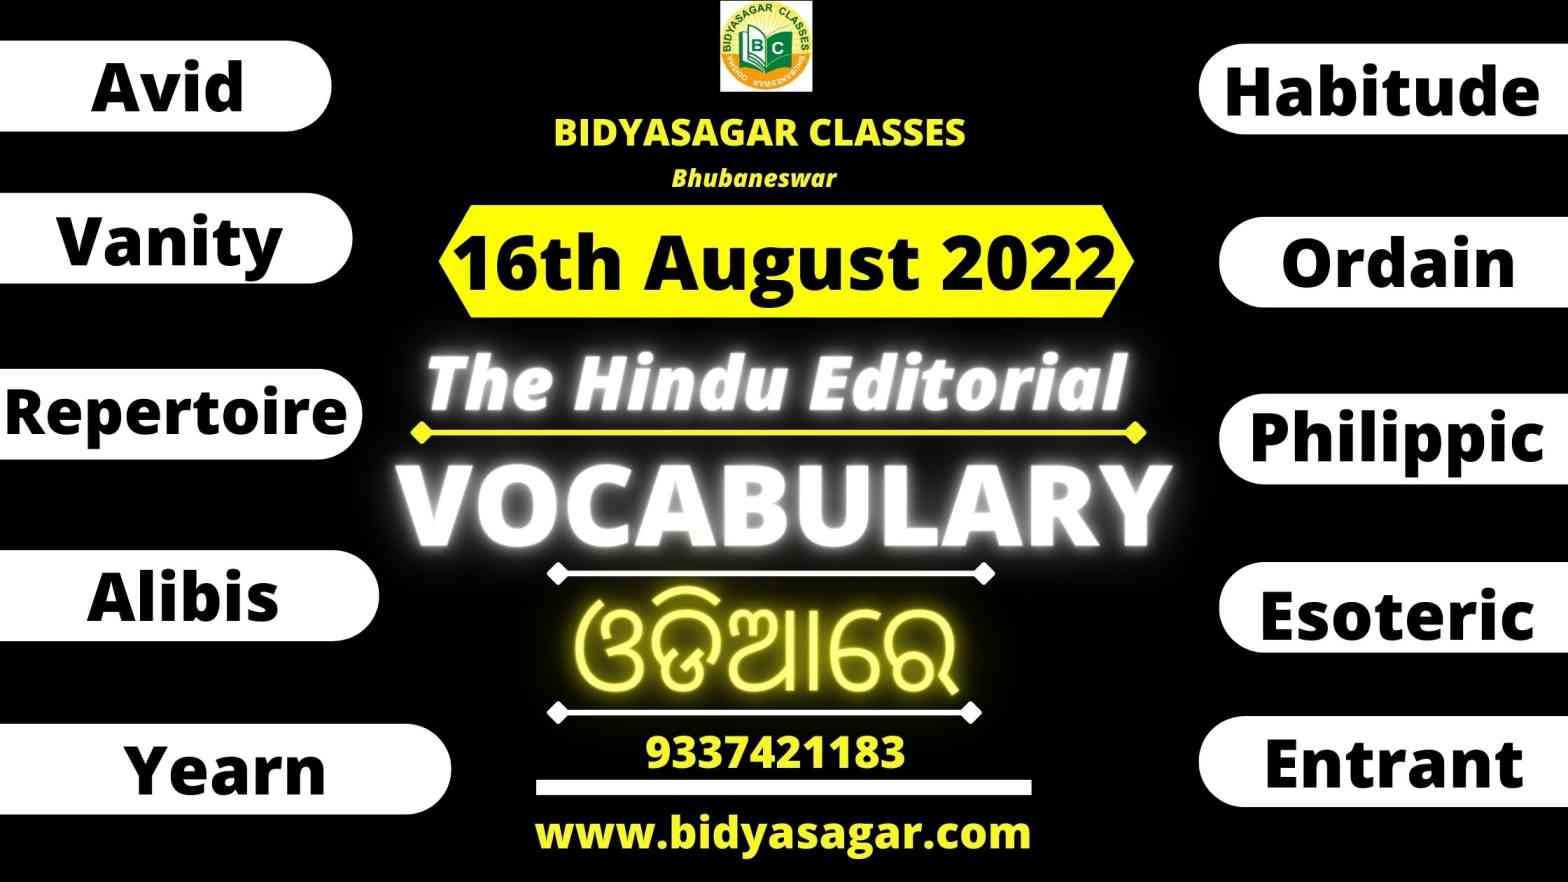 The Hindu Editorial Vocabulary of 16th August 2022